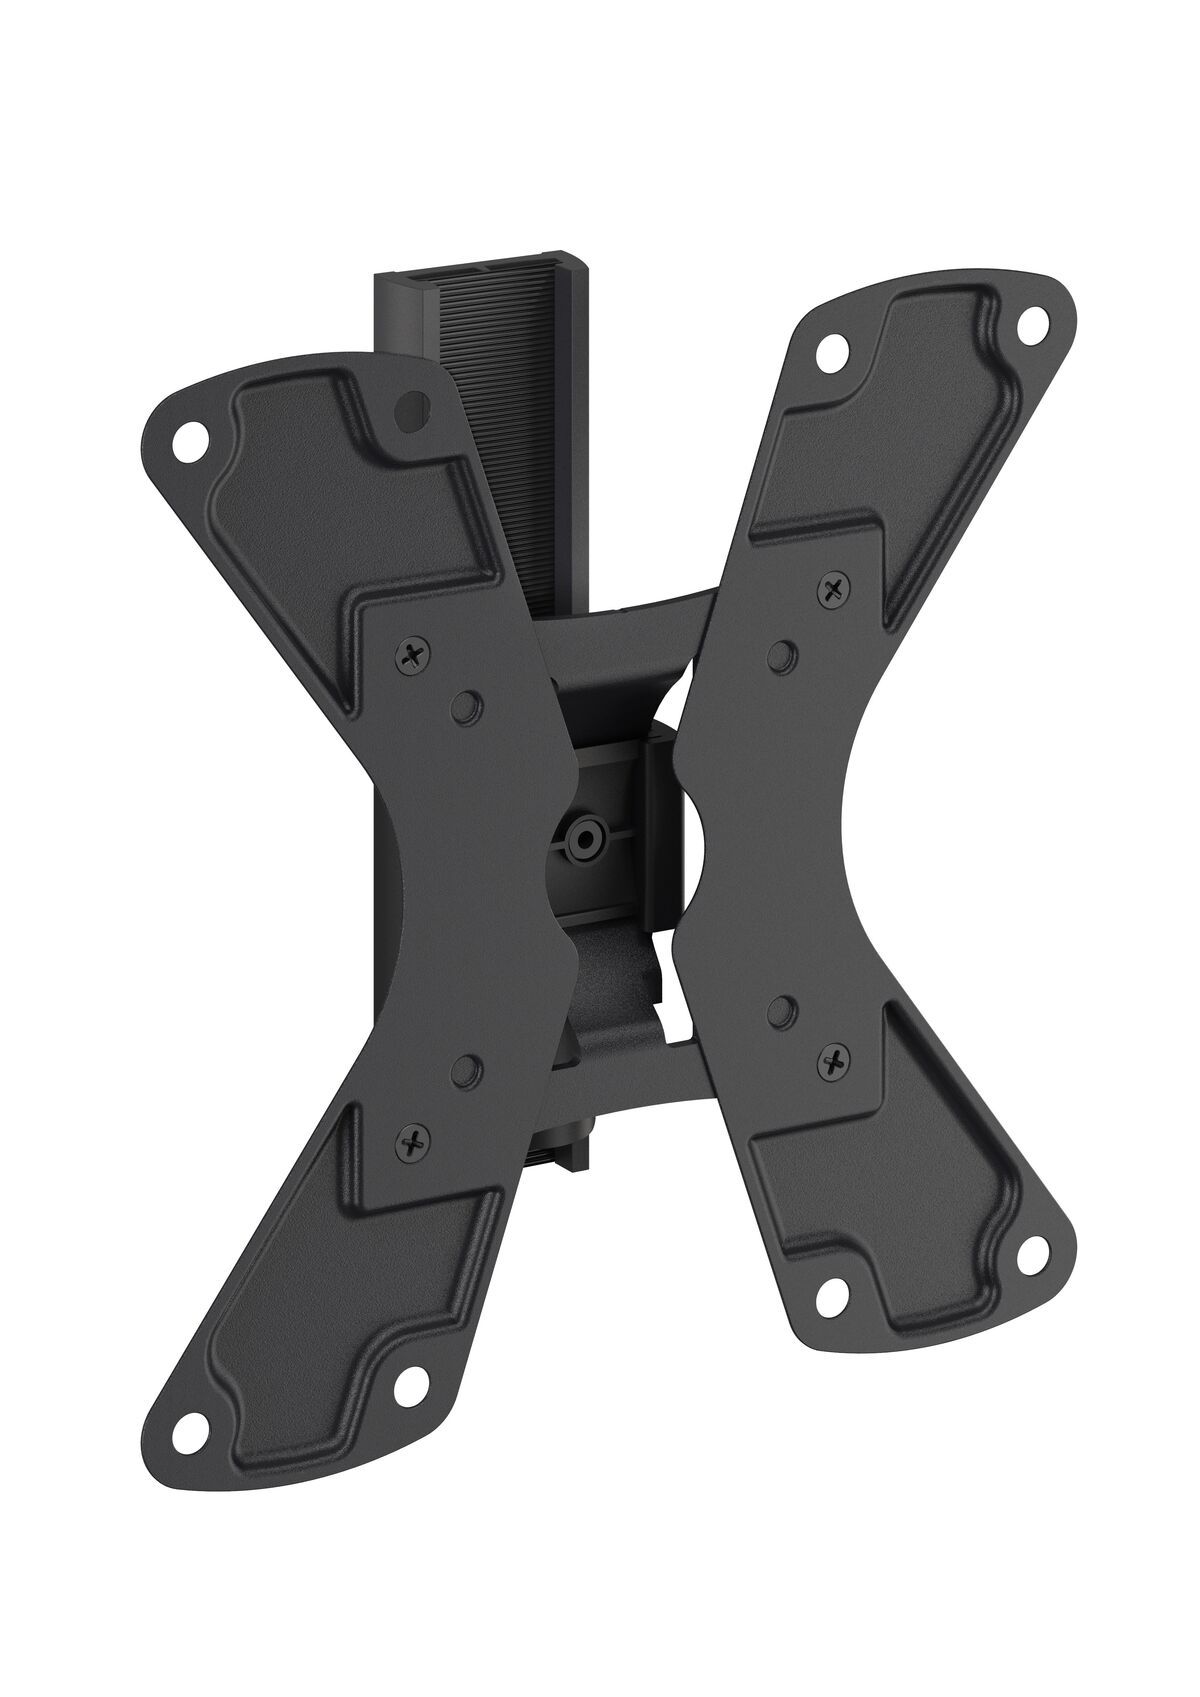 Vogel's WALL 1120 Full-Motion TV Wall Mount - Suitable for 19 up to 37 inch TVs - Limited motion (up to 60°) - Tilt -10°/+10° - Product